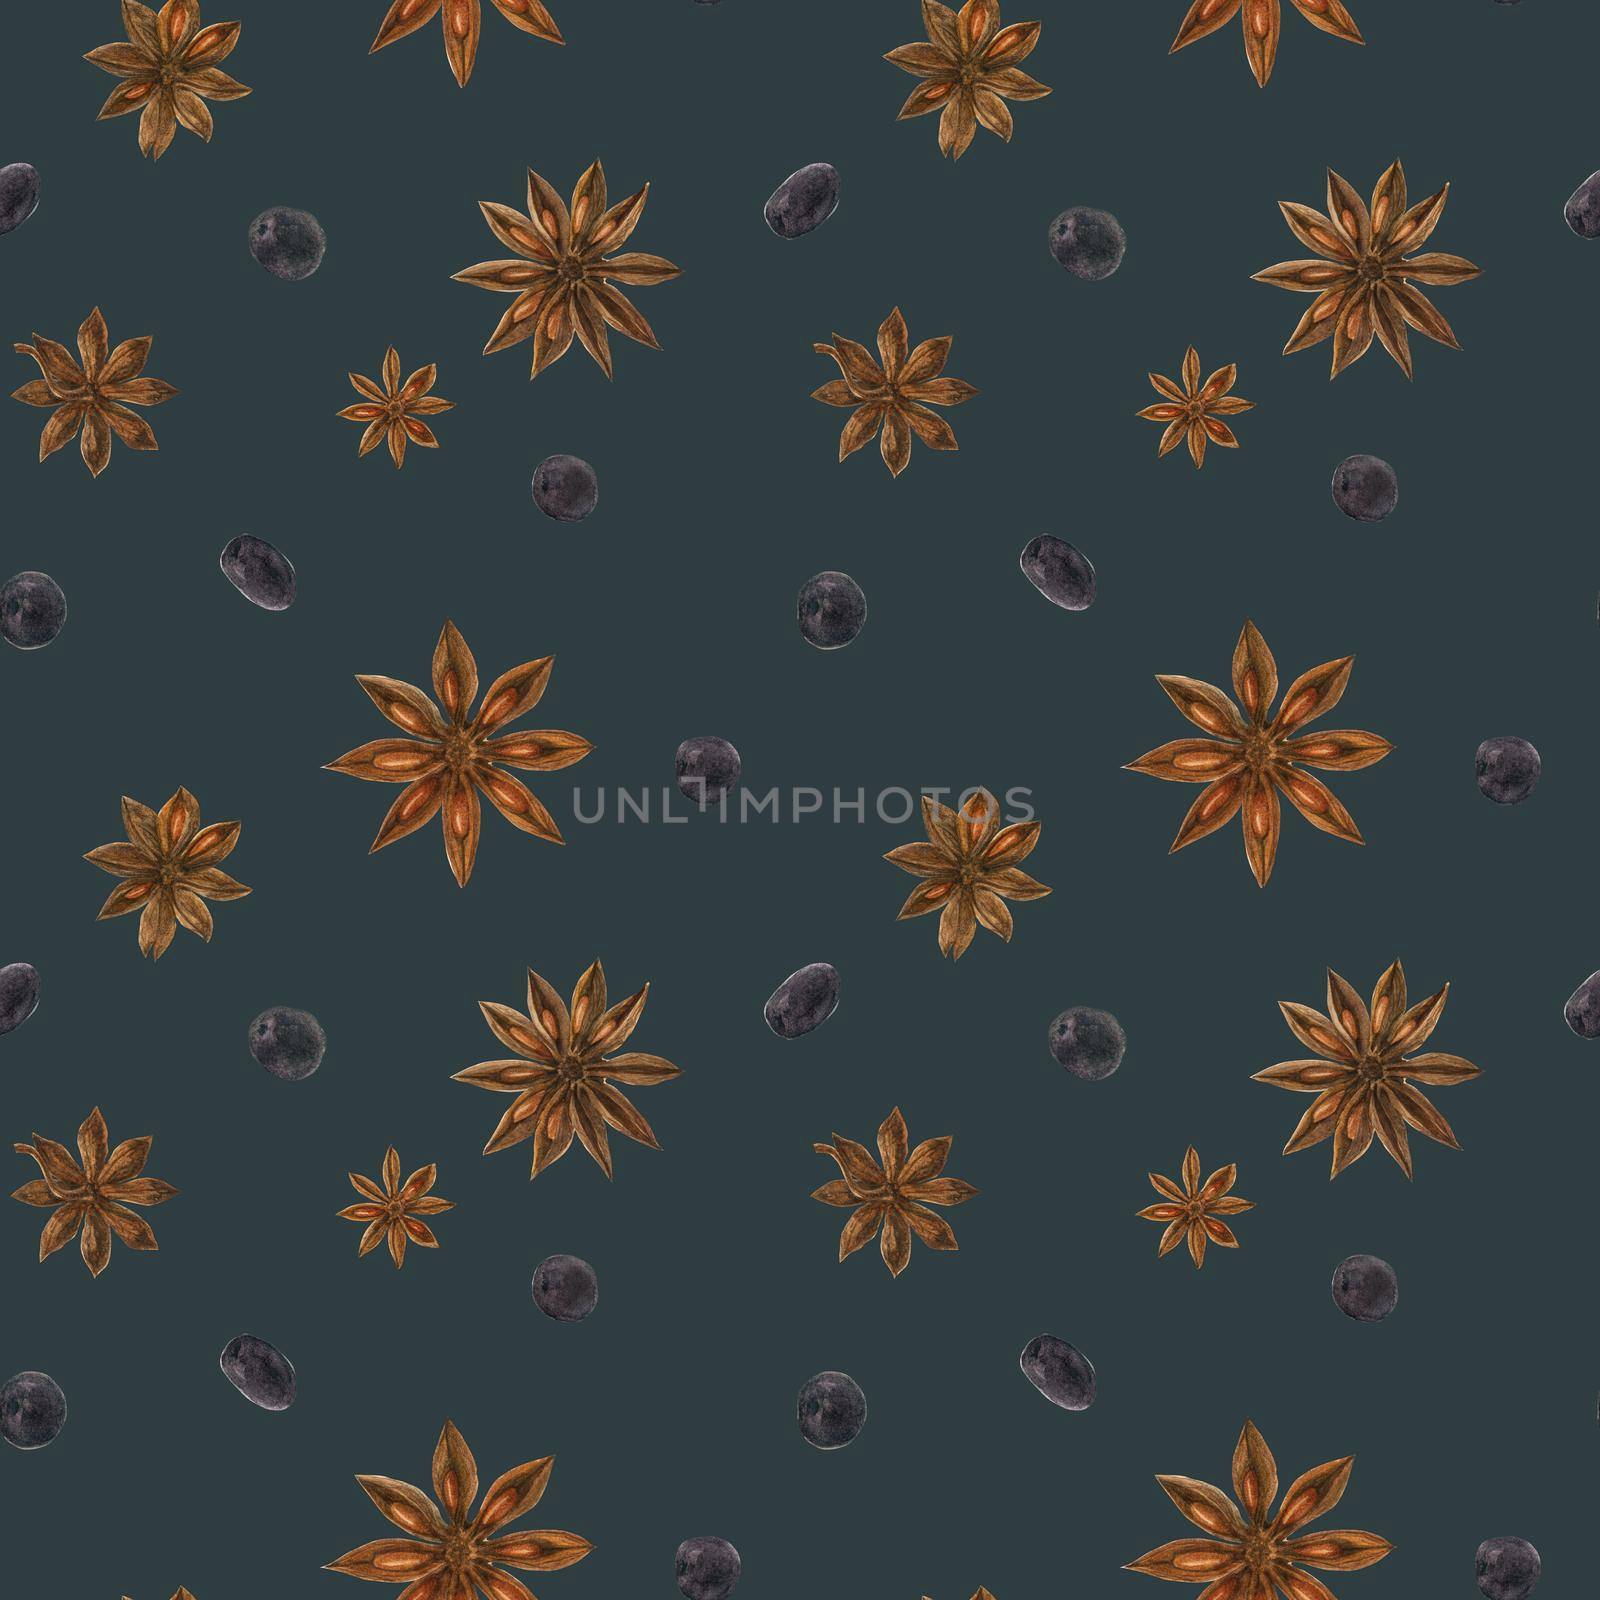 Dried star anise and berries blue seamless pattern by Xeniasnowstorm